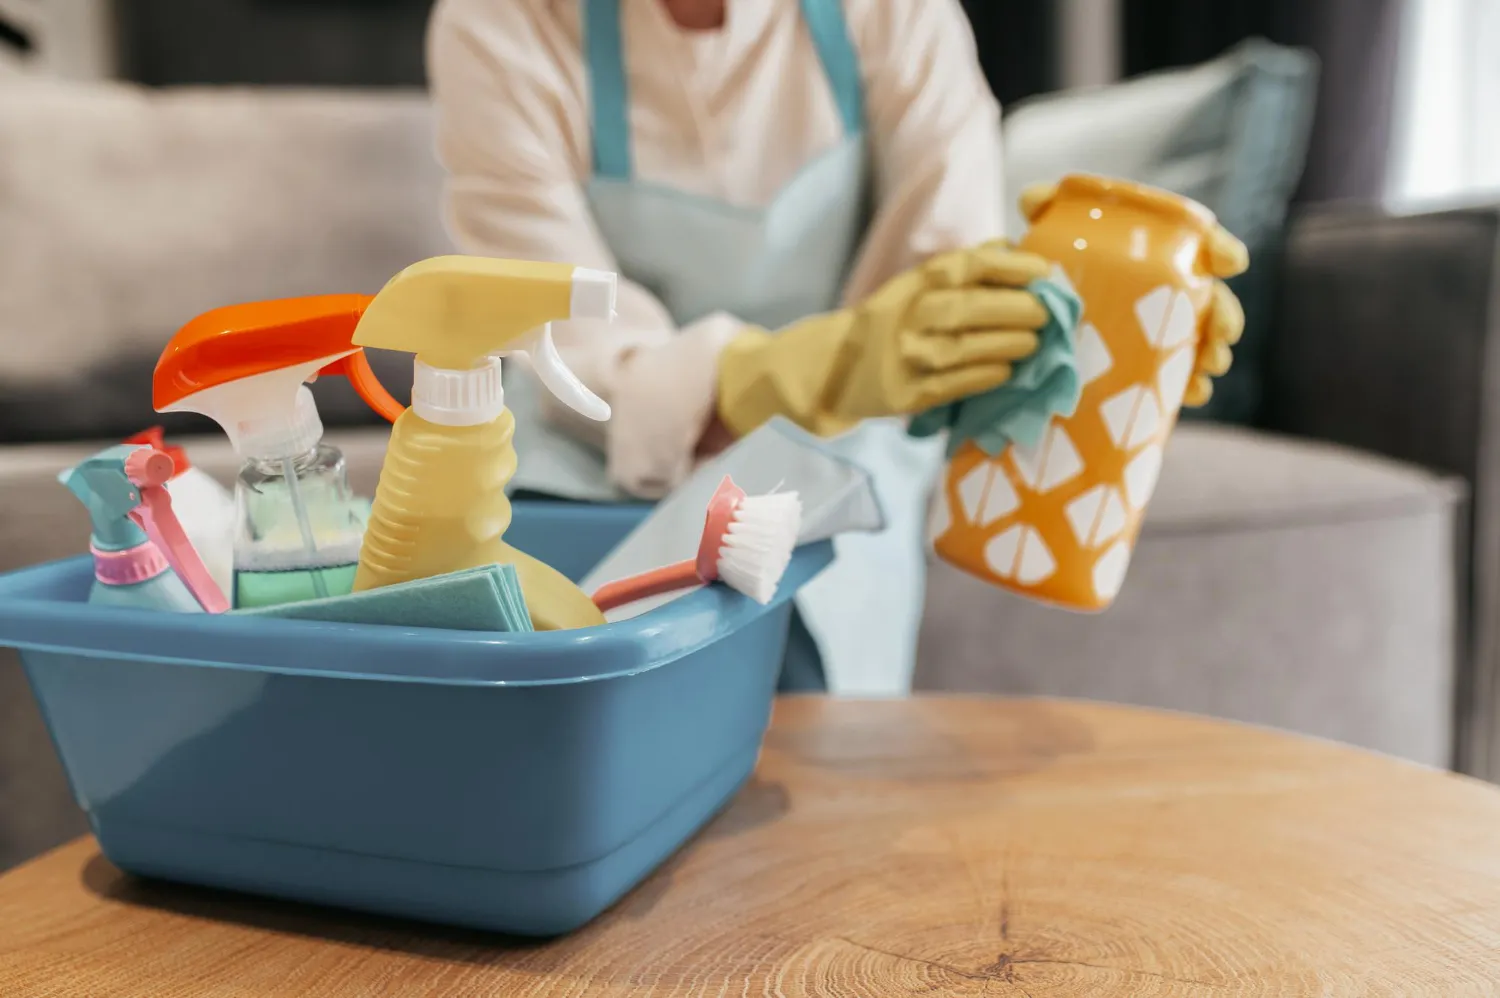 Cleaning products should not be stored alongside food in your kitchen.